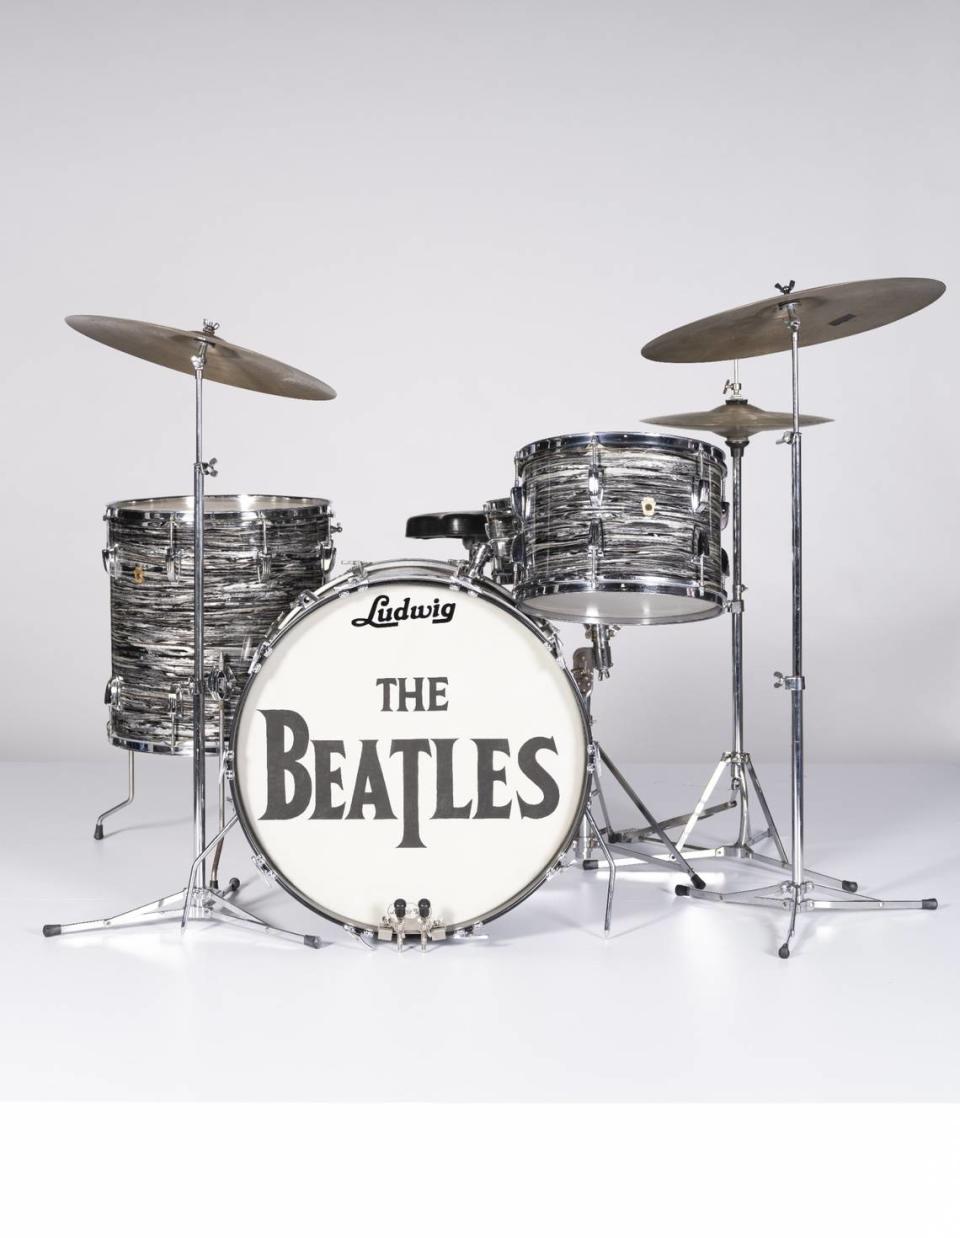 Ringo Starr’s 1965 Ludwig Super Classic drum kit with oyster black pearl finish. He used this kit in The Beatles’ first Shea Stadium concert on Aug. 15, 1965. Scott Robert Ritchie